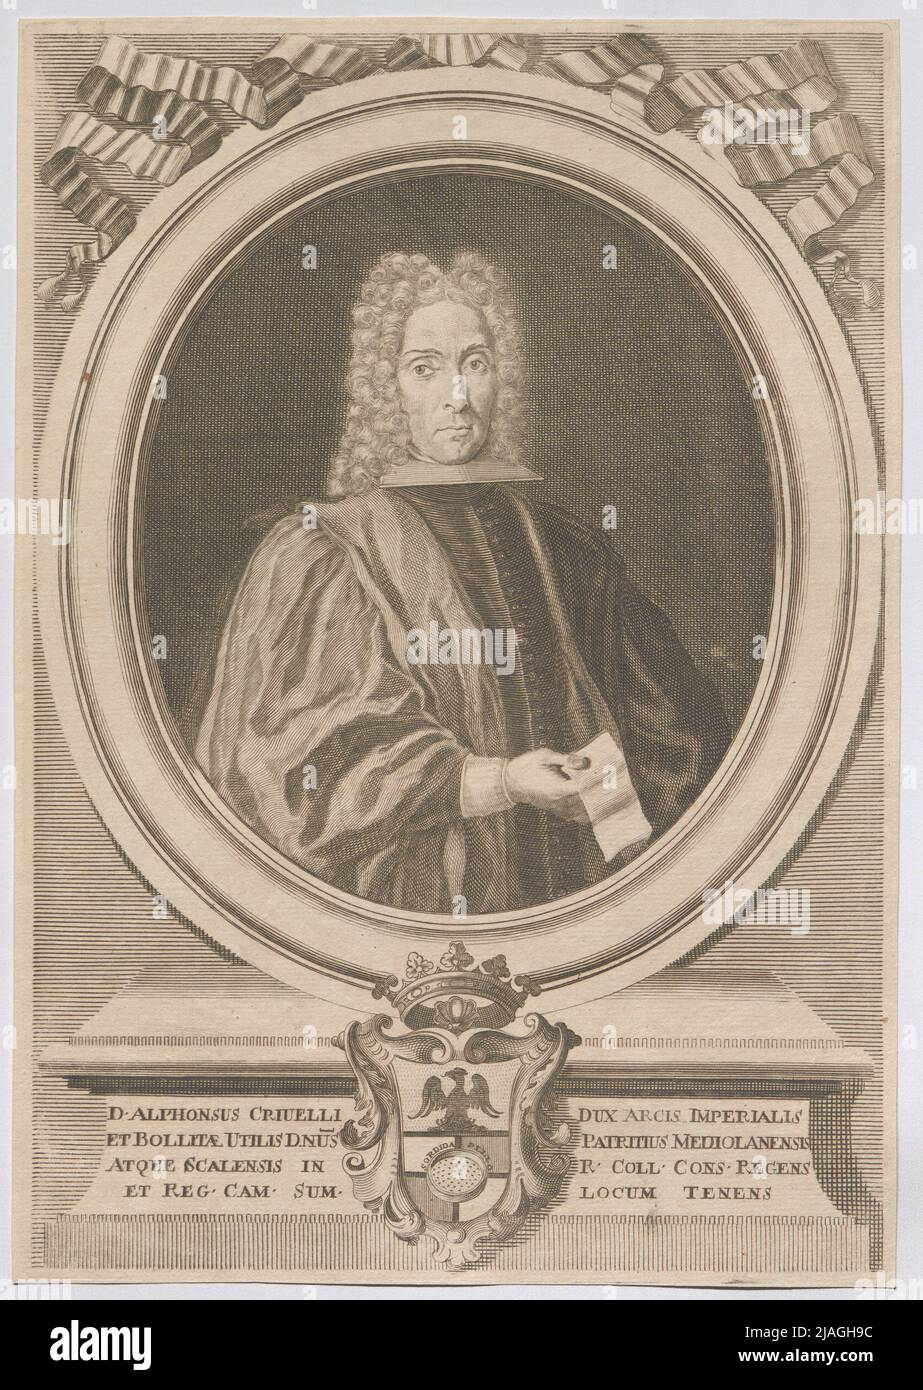 D'Alphonsus Criuelli Leader Captain Imperial and Bollitae useful Dnus Patrich Milan and Scalply in R. coli. Cons. Regent and Reg. (...) ". Herzog D'Alphonsus Civelli, Mailänder Patrizier. Unknown Stock Photo